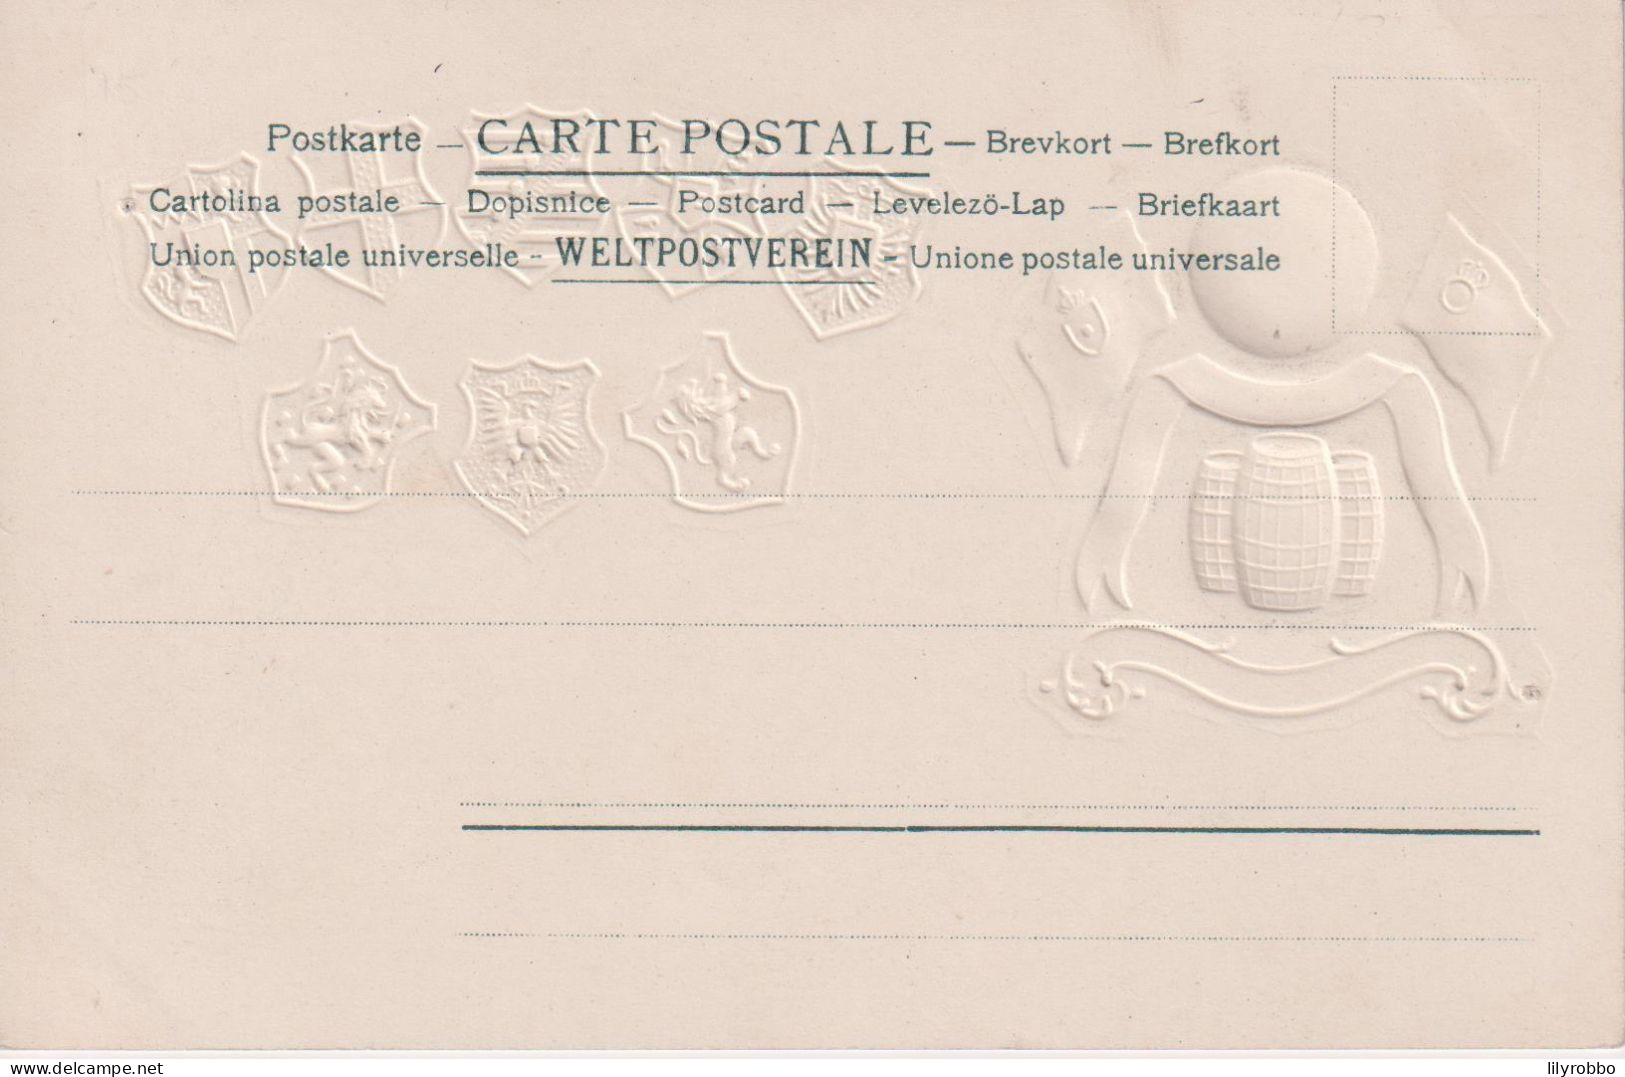 BELGIUM - ADvertising THE CONTINENTAL BODEGA COMPANY. With Country Crests. Embossed & Undivided Rear - Reclame